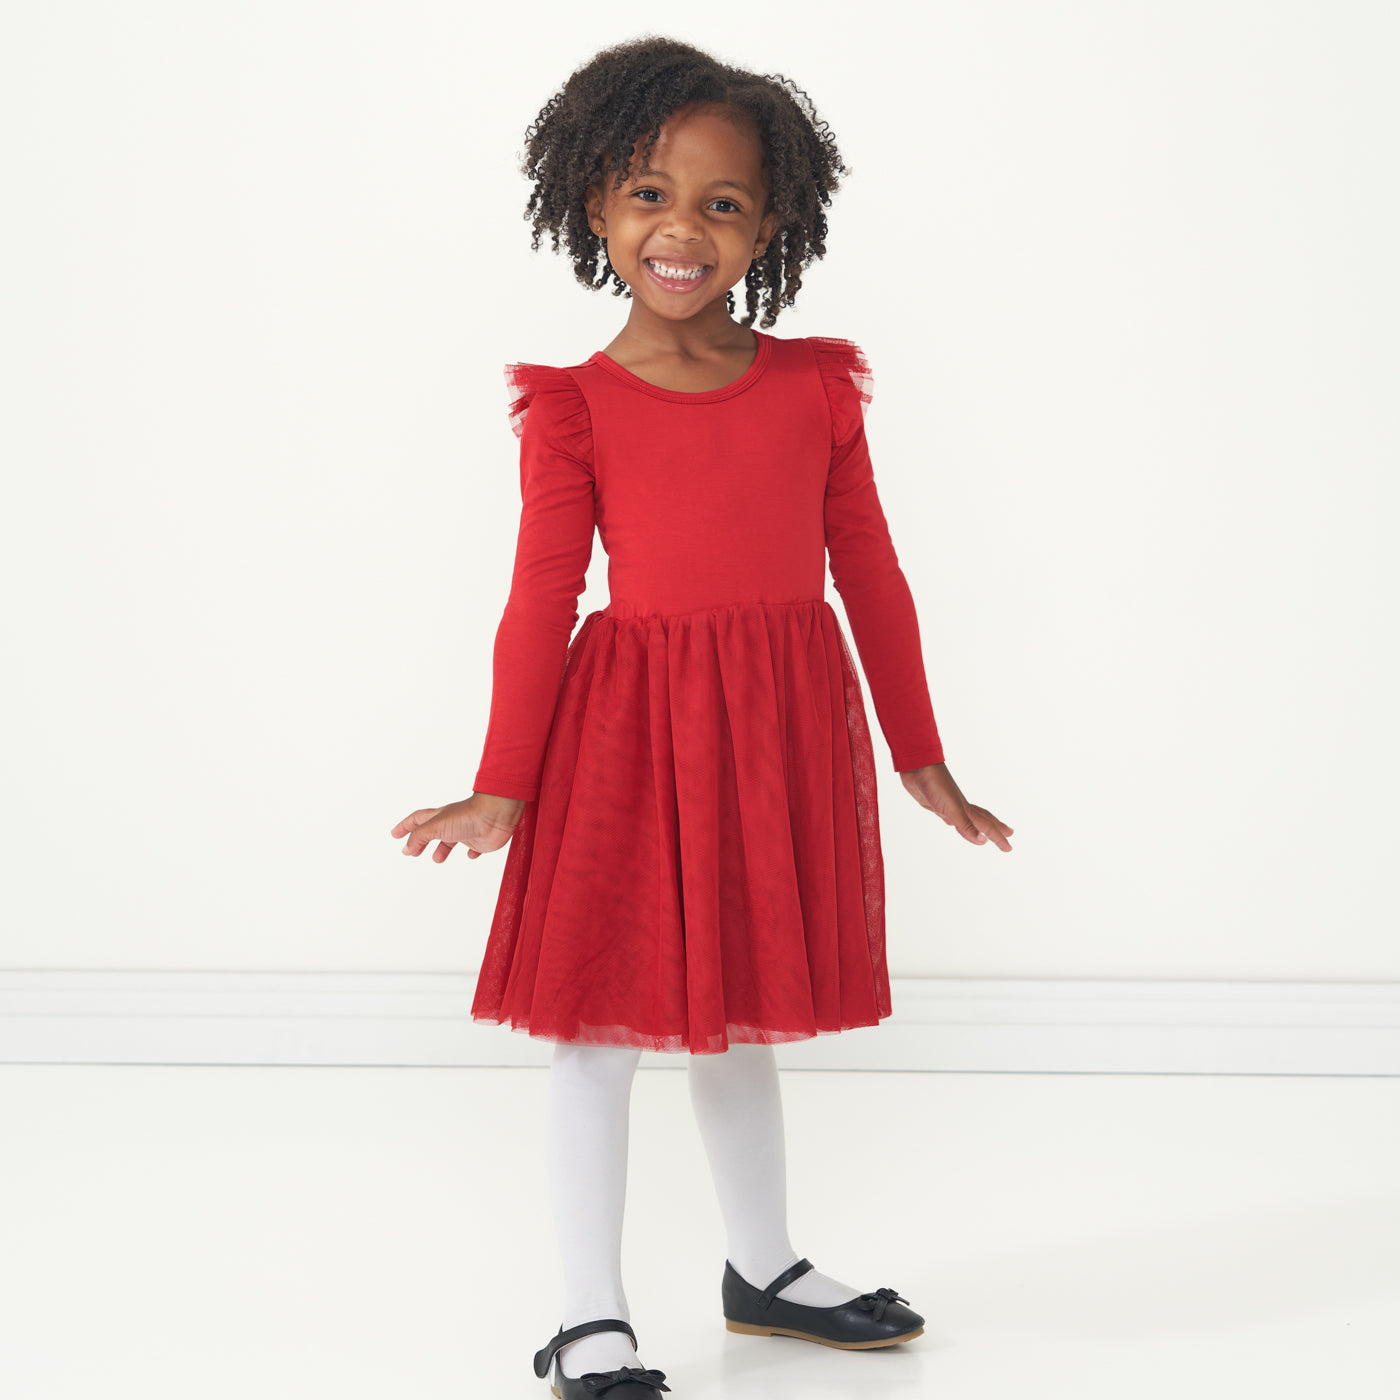 Child wearing a Holiday Red flutter tutu dress